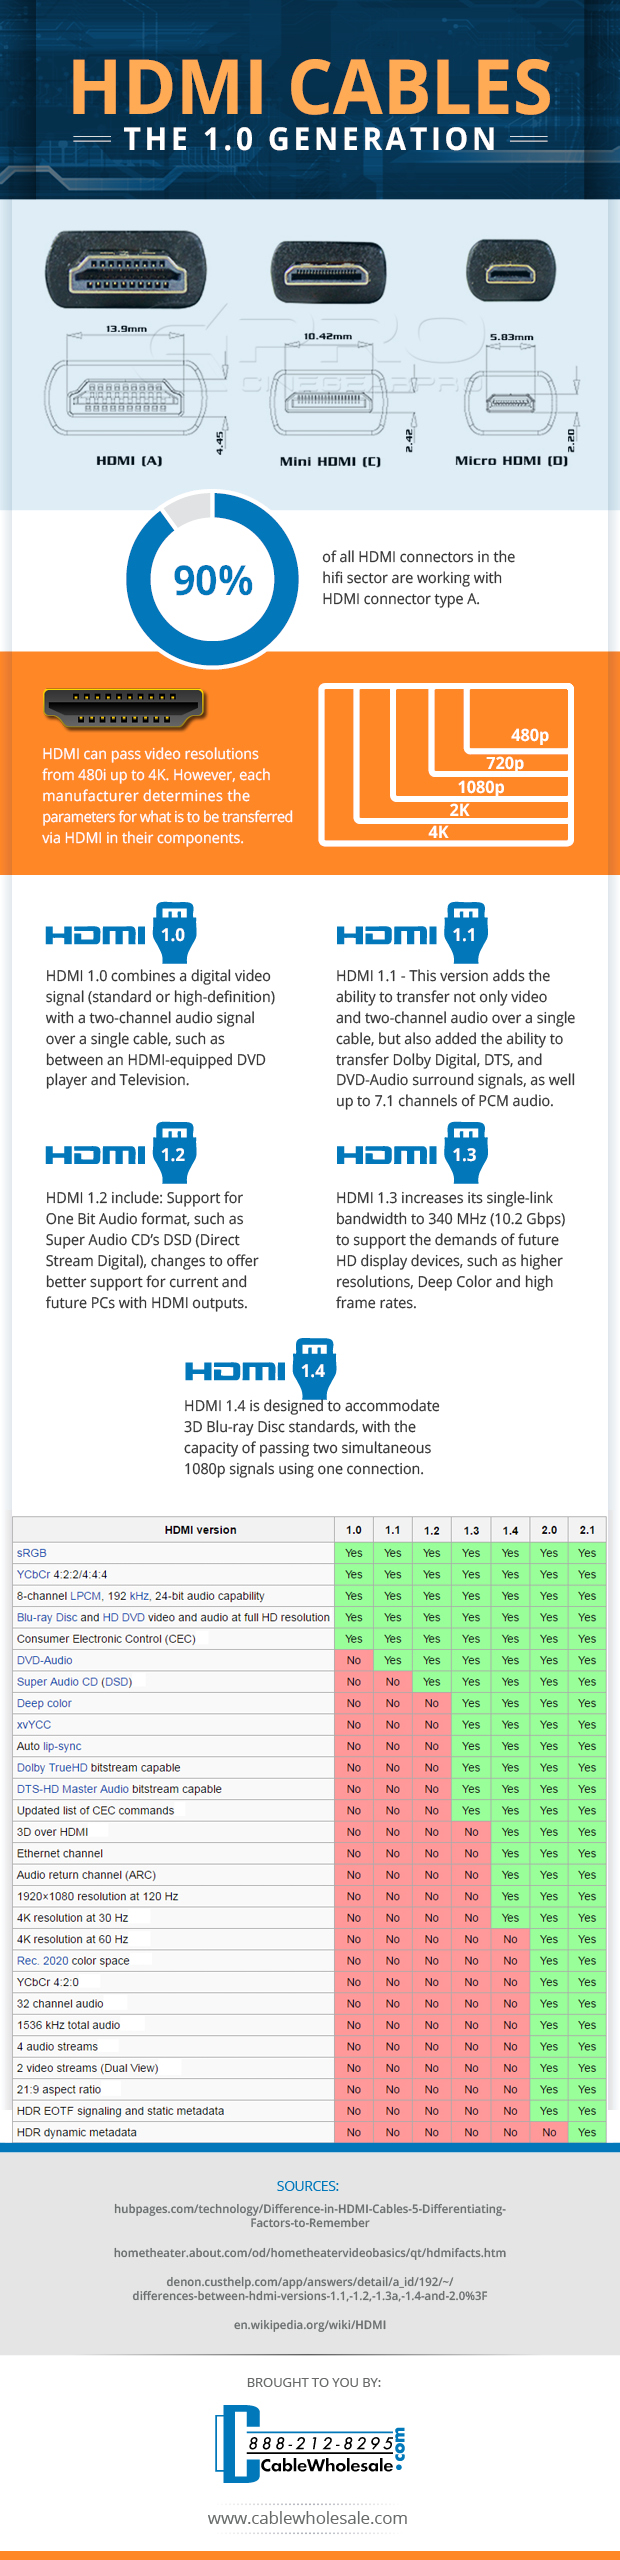 HDMI: The 1.0 Generation Explained